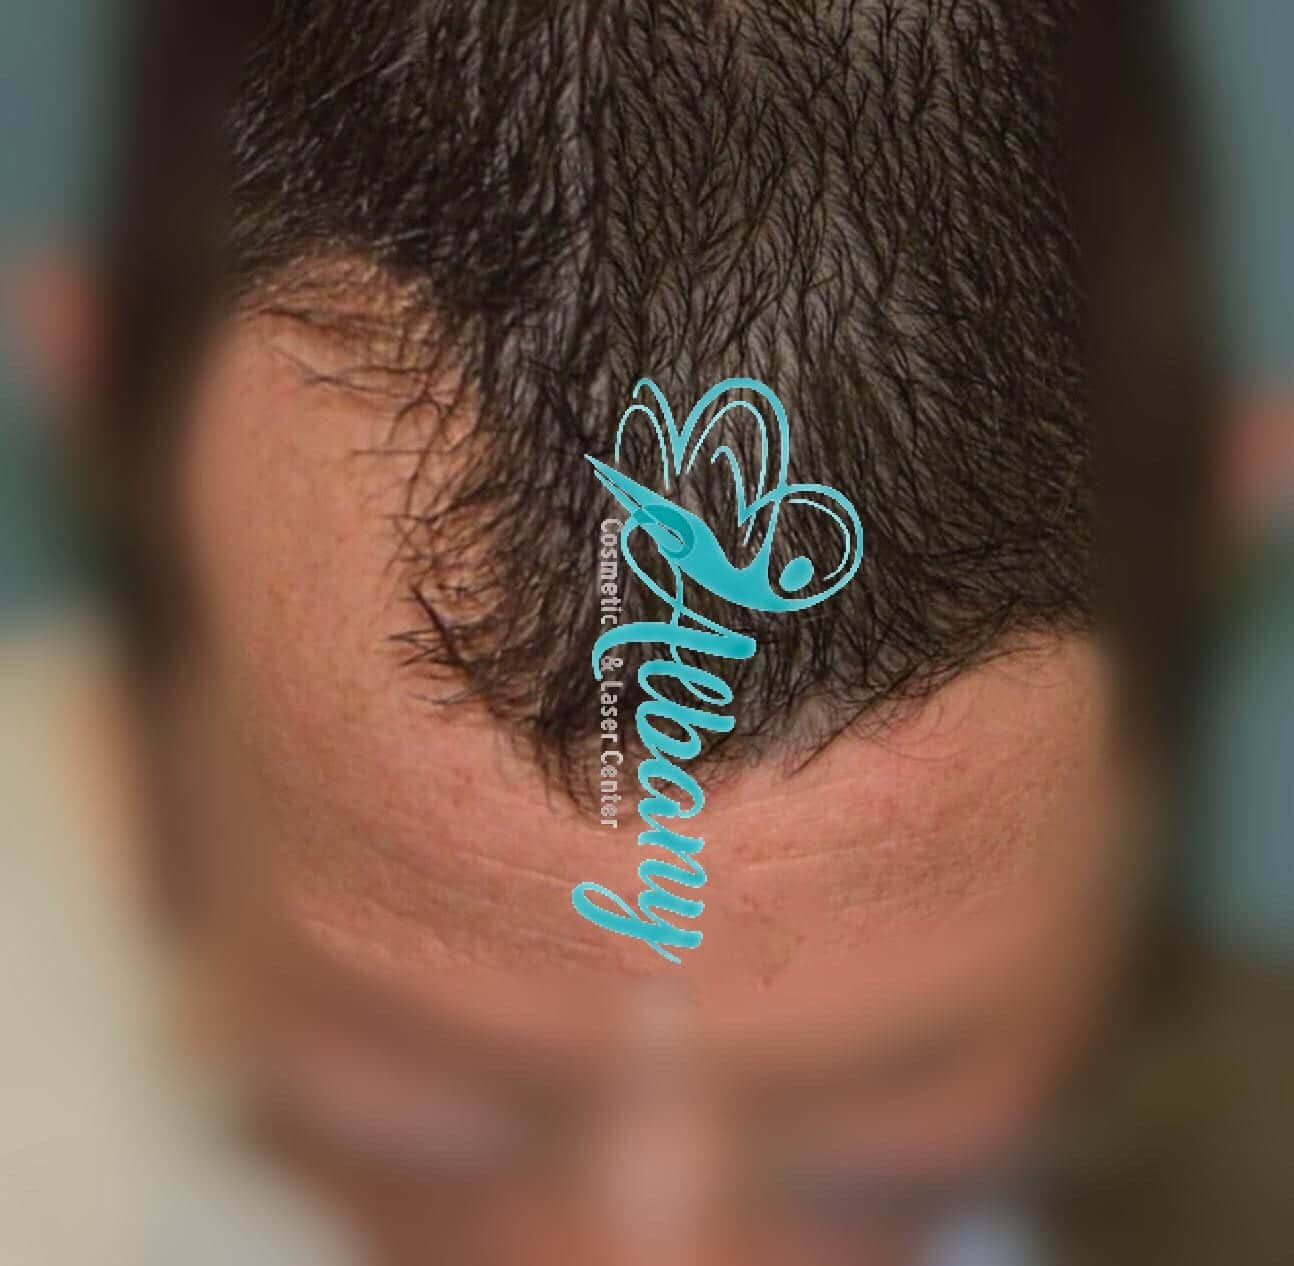 Before and after Hair loss treatment in Edmonton